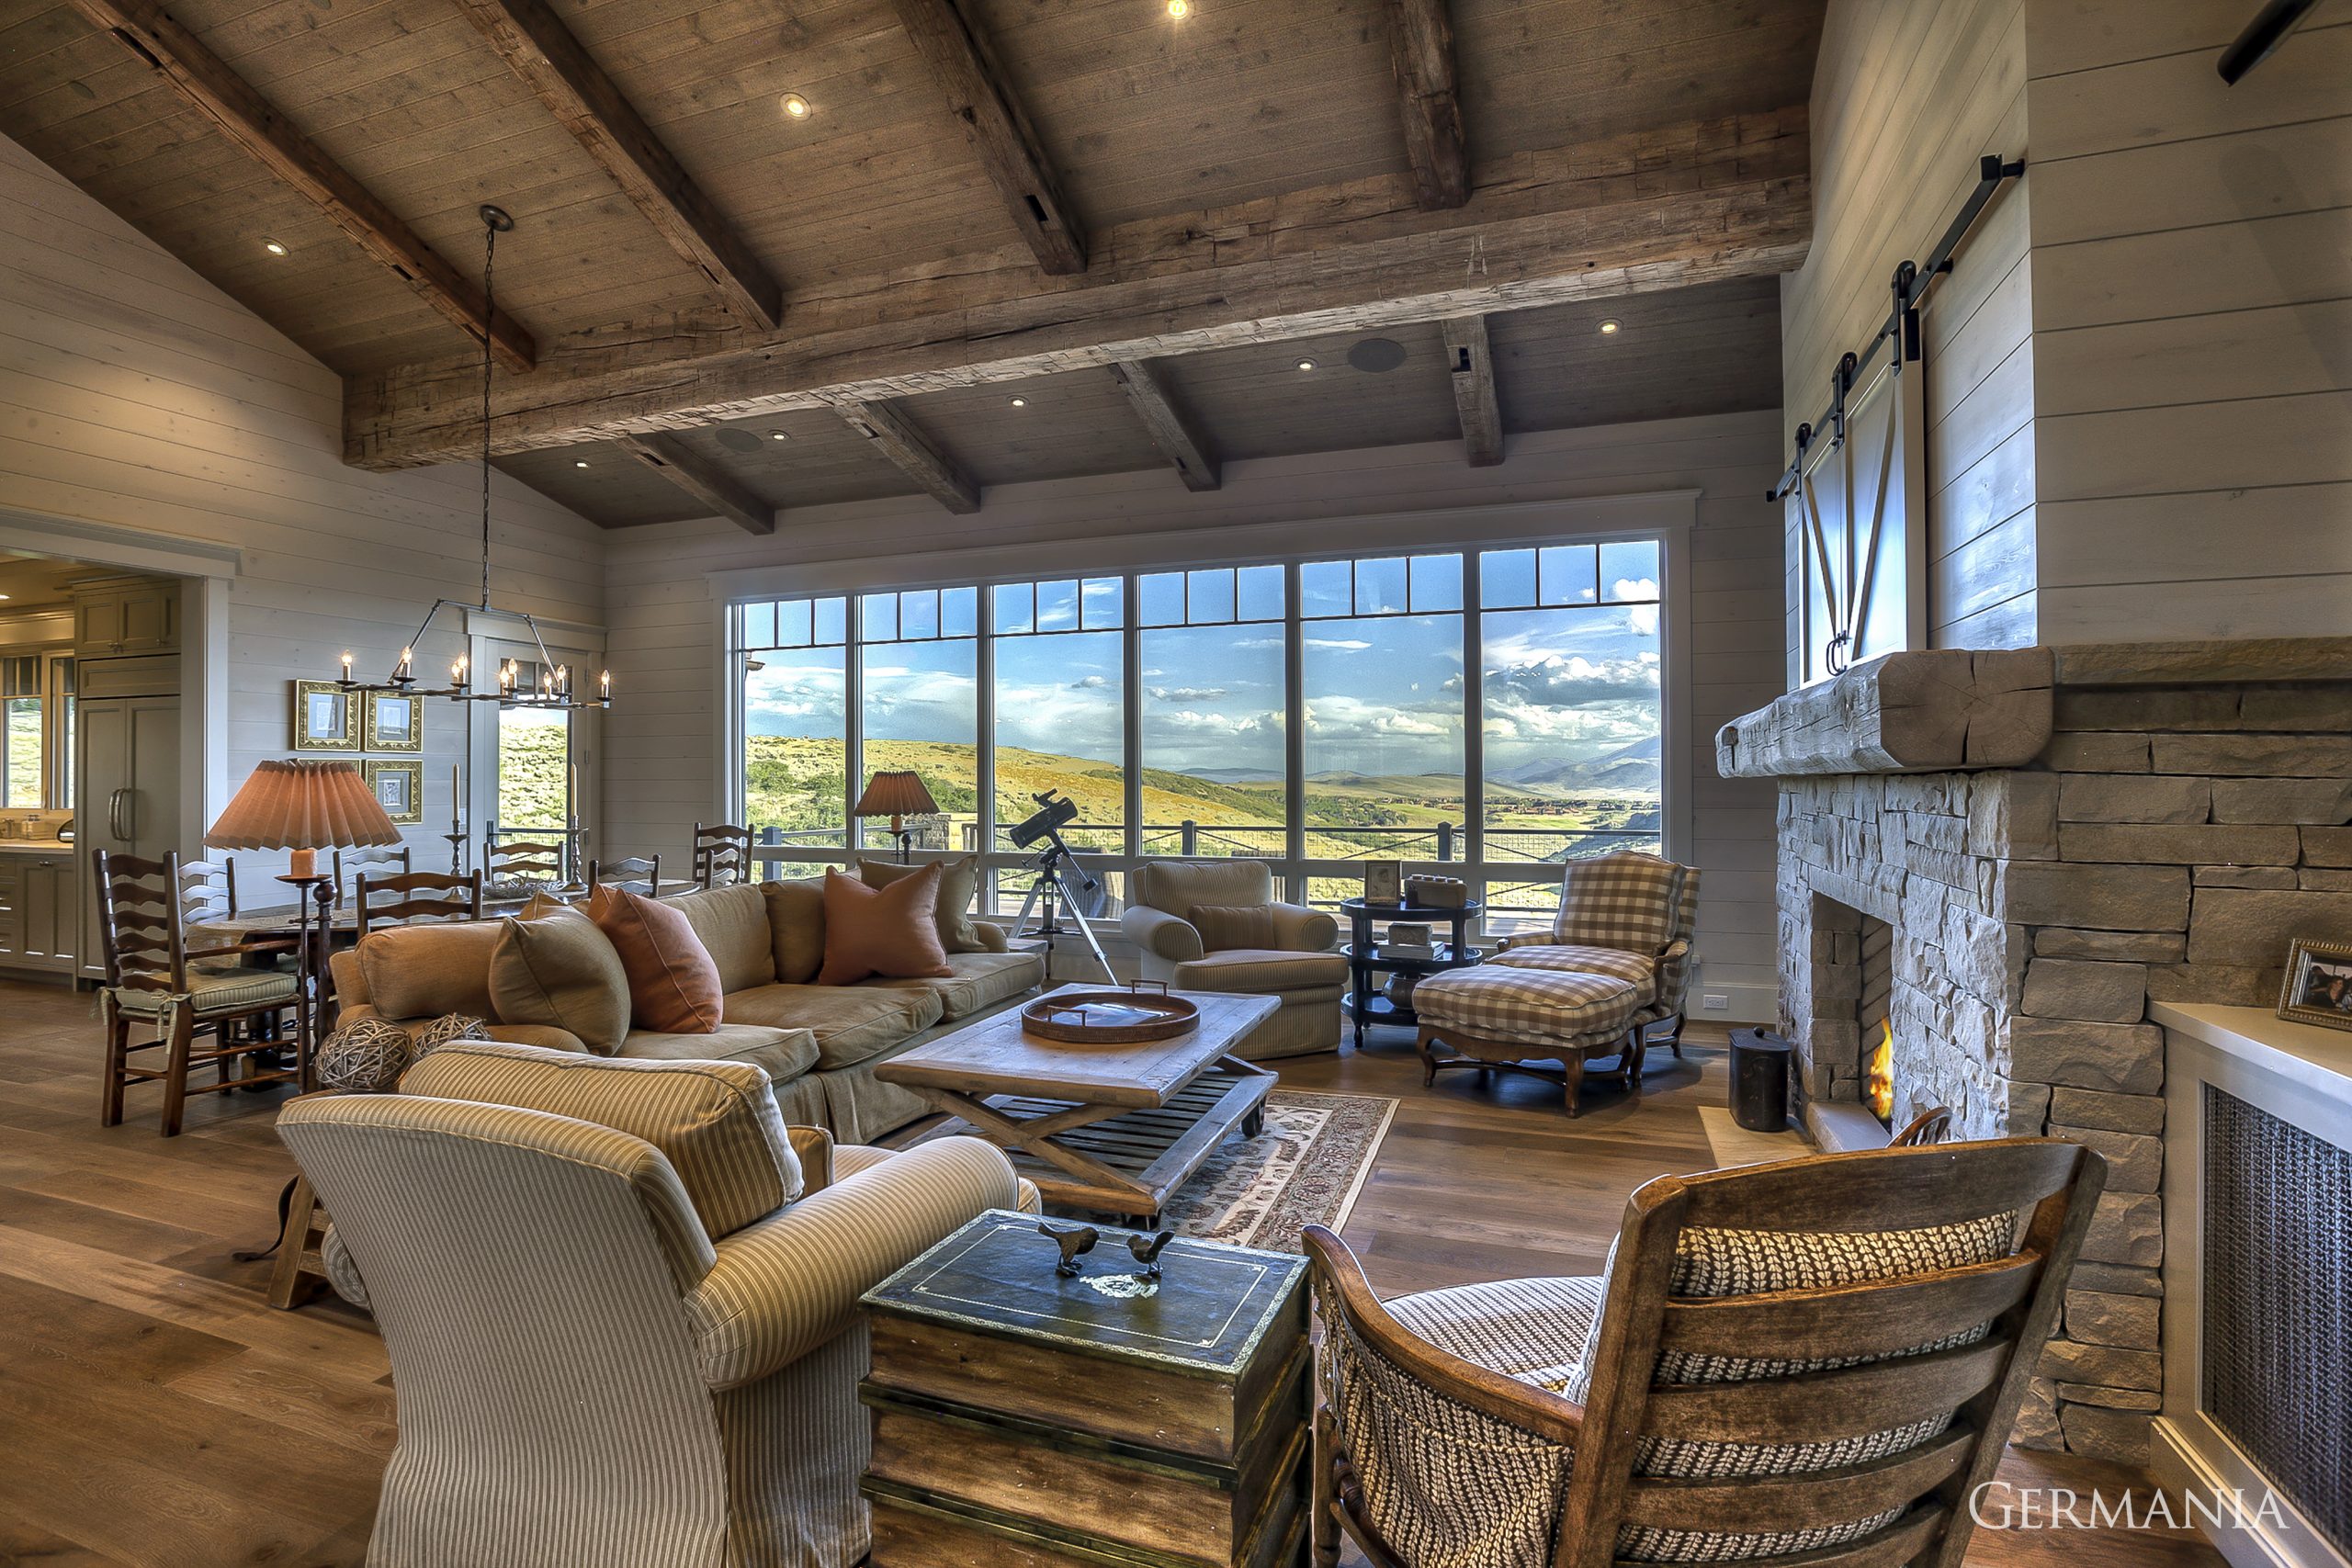 When it comes to luxury home living rooms, we pay attention to every minute detail. From tongue and groove ceilings with rustic looking beams to the fireplace and wood floors, Germania Construction are masters at the craft.